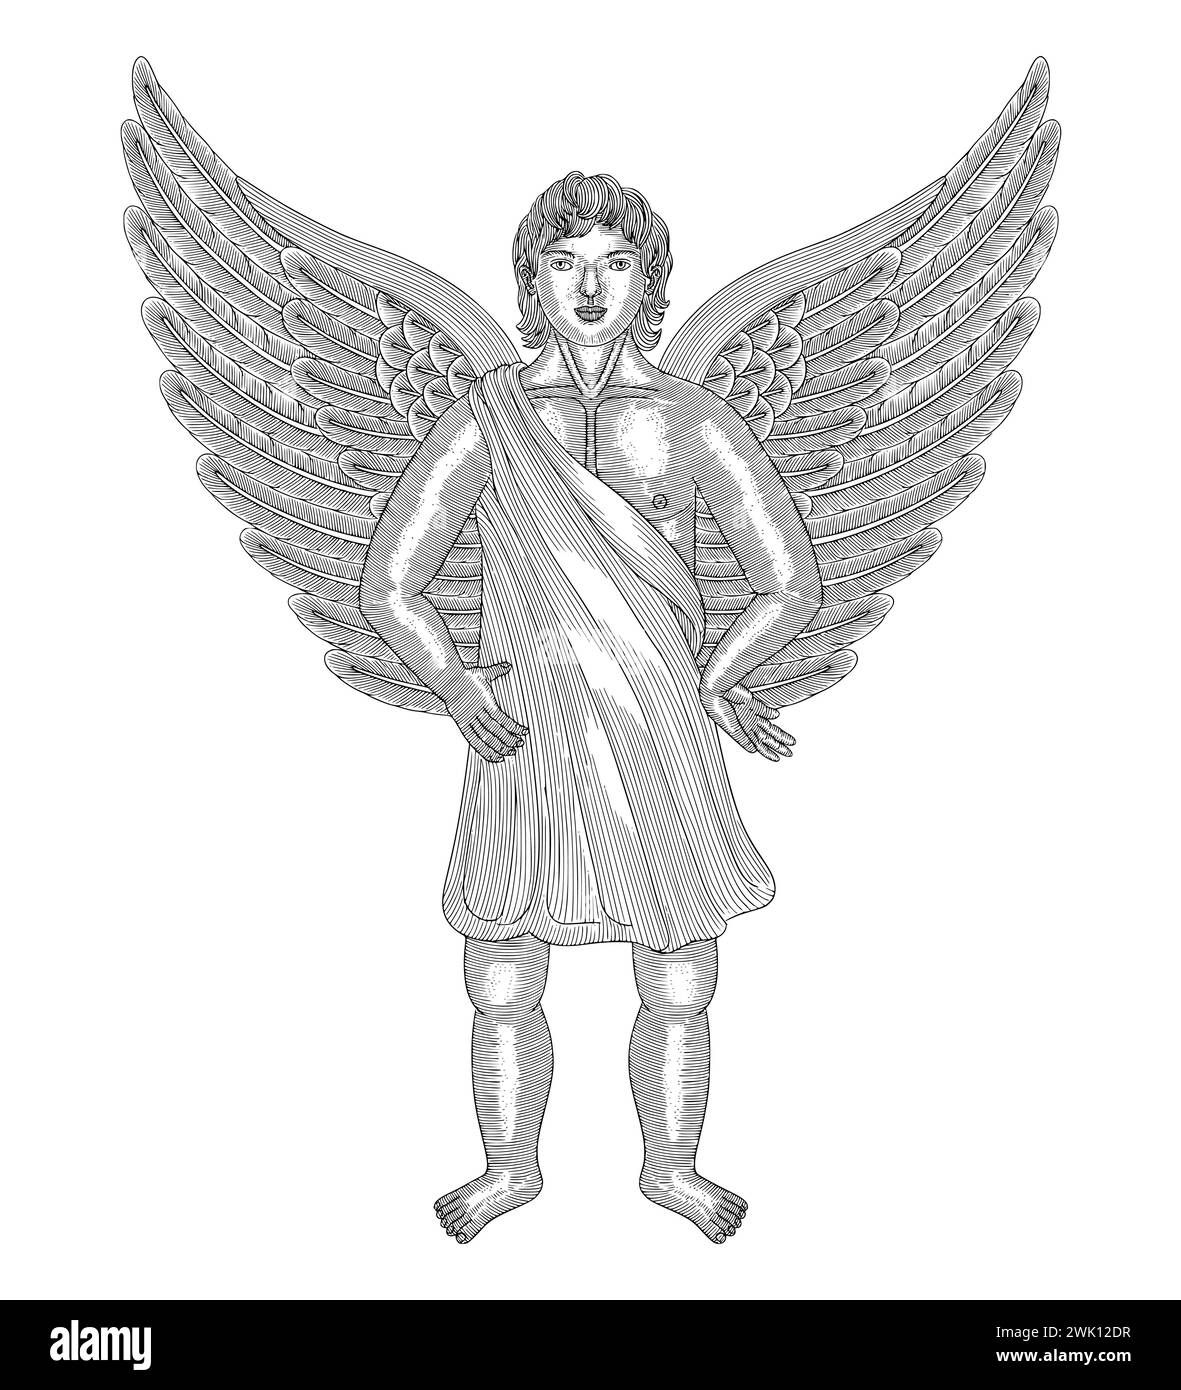 Young angel standing, Vintage engraving drawing style illustration Stock Vector